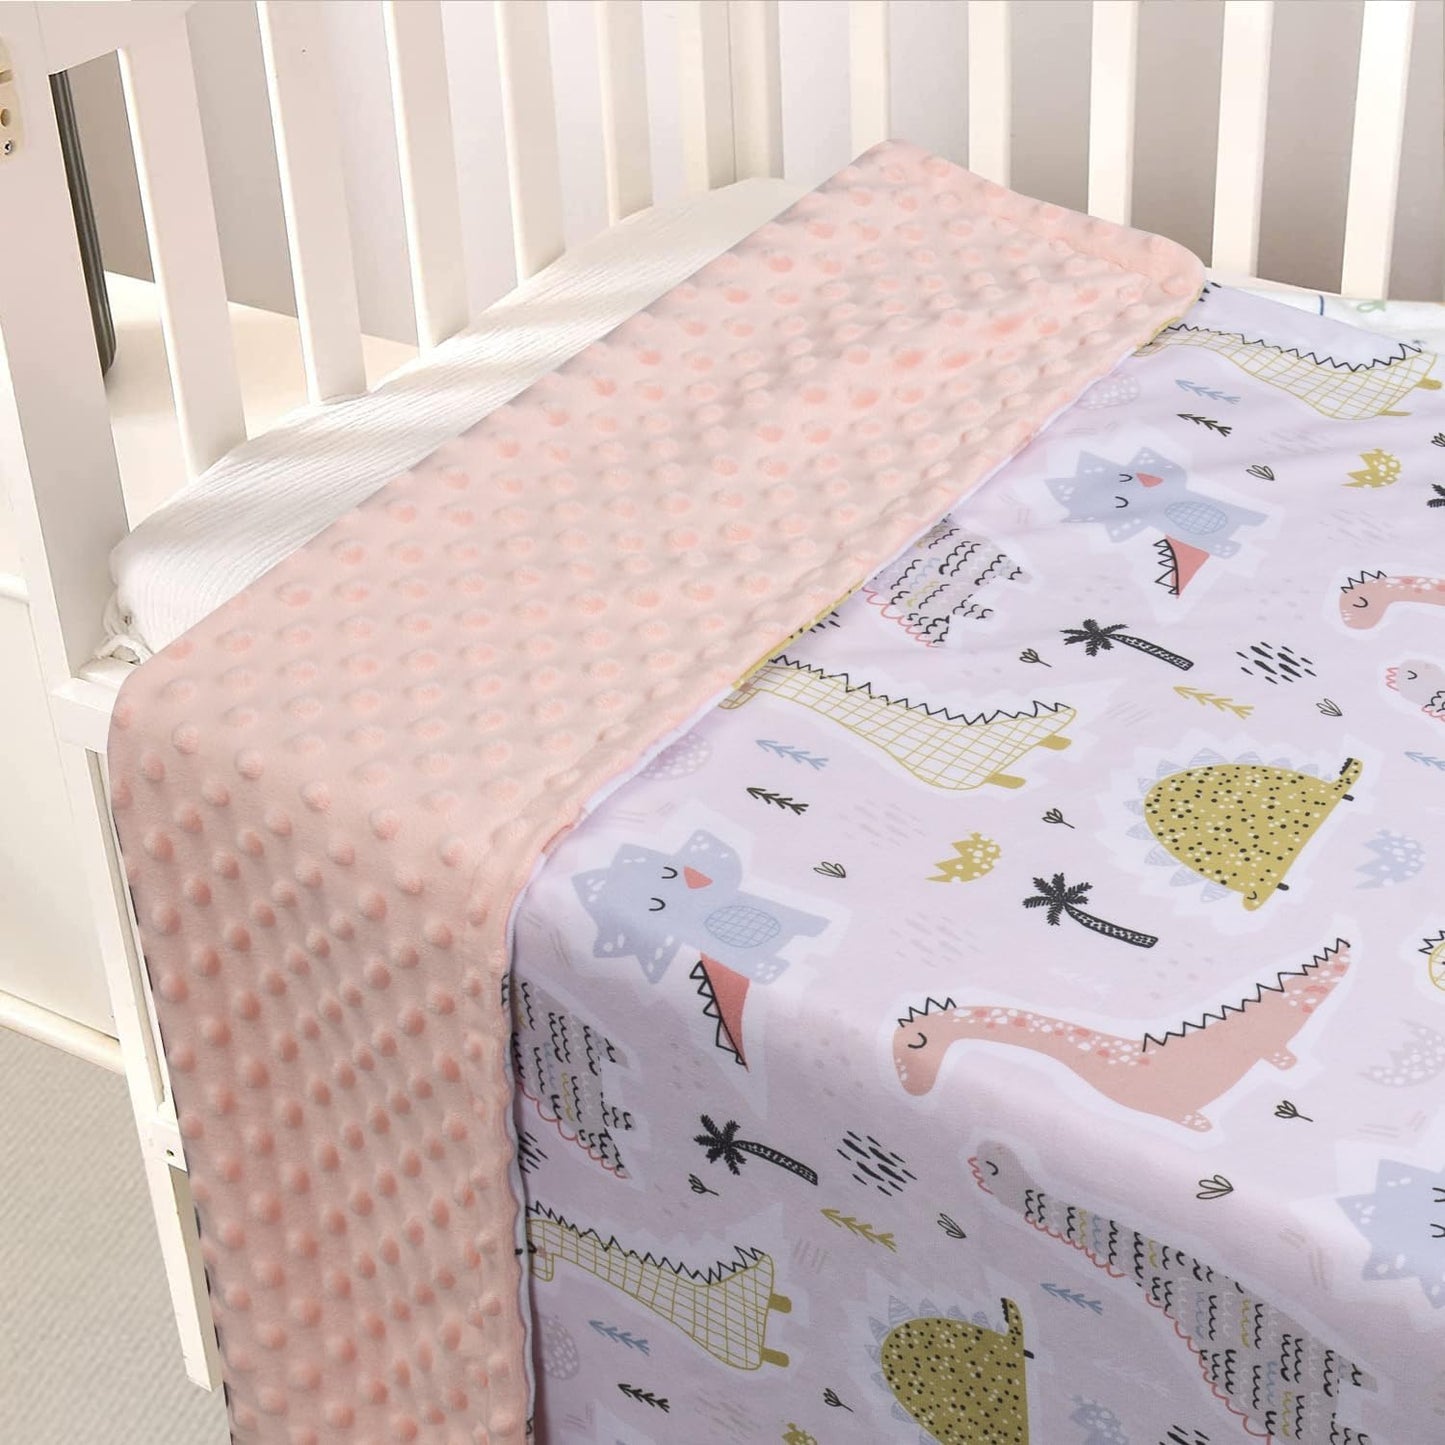 Donsonny Baby Blanket for Boys Girls Soft Minky with Double Layer Dotted Backing, Color Dinosaurs Printed 30 x 40 Inch Receiving Blanket